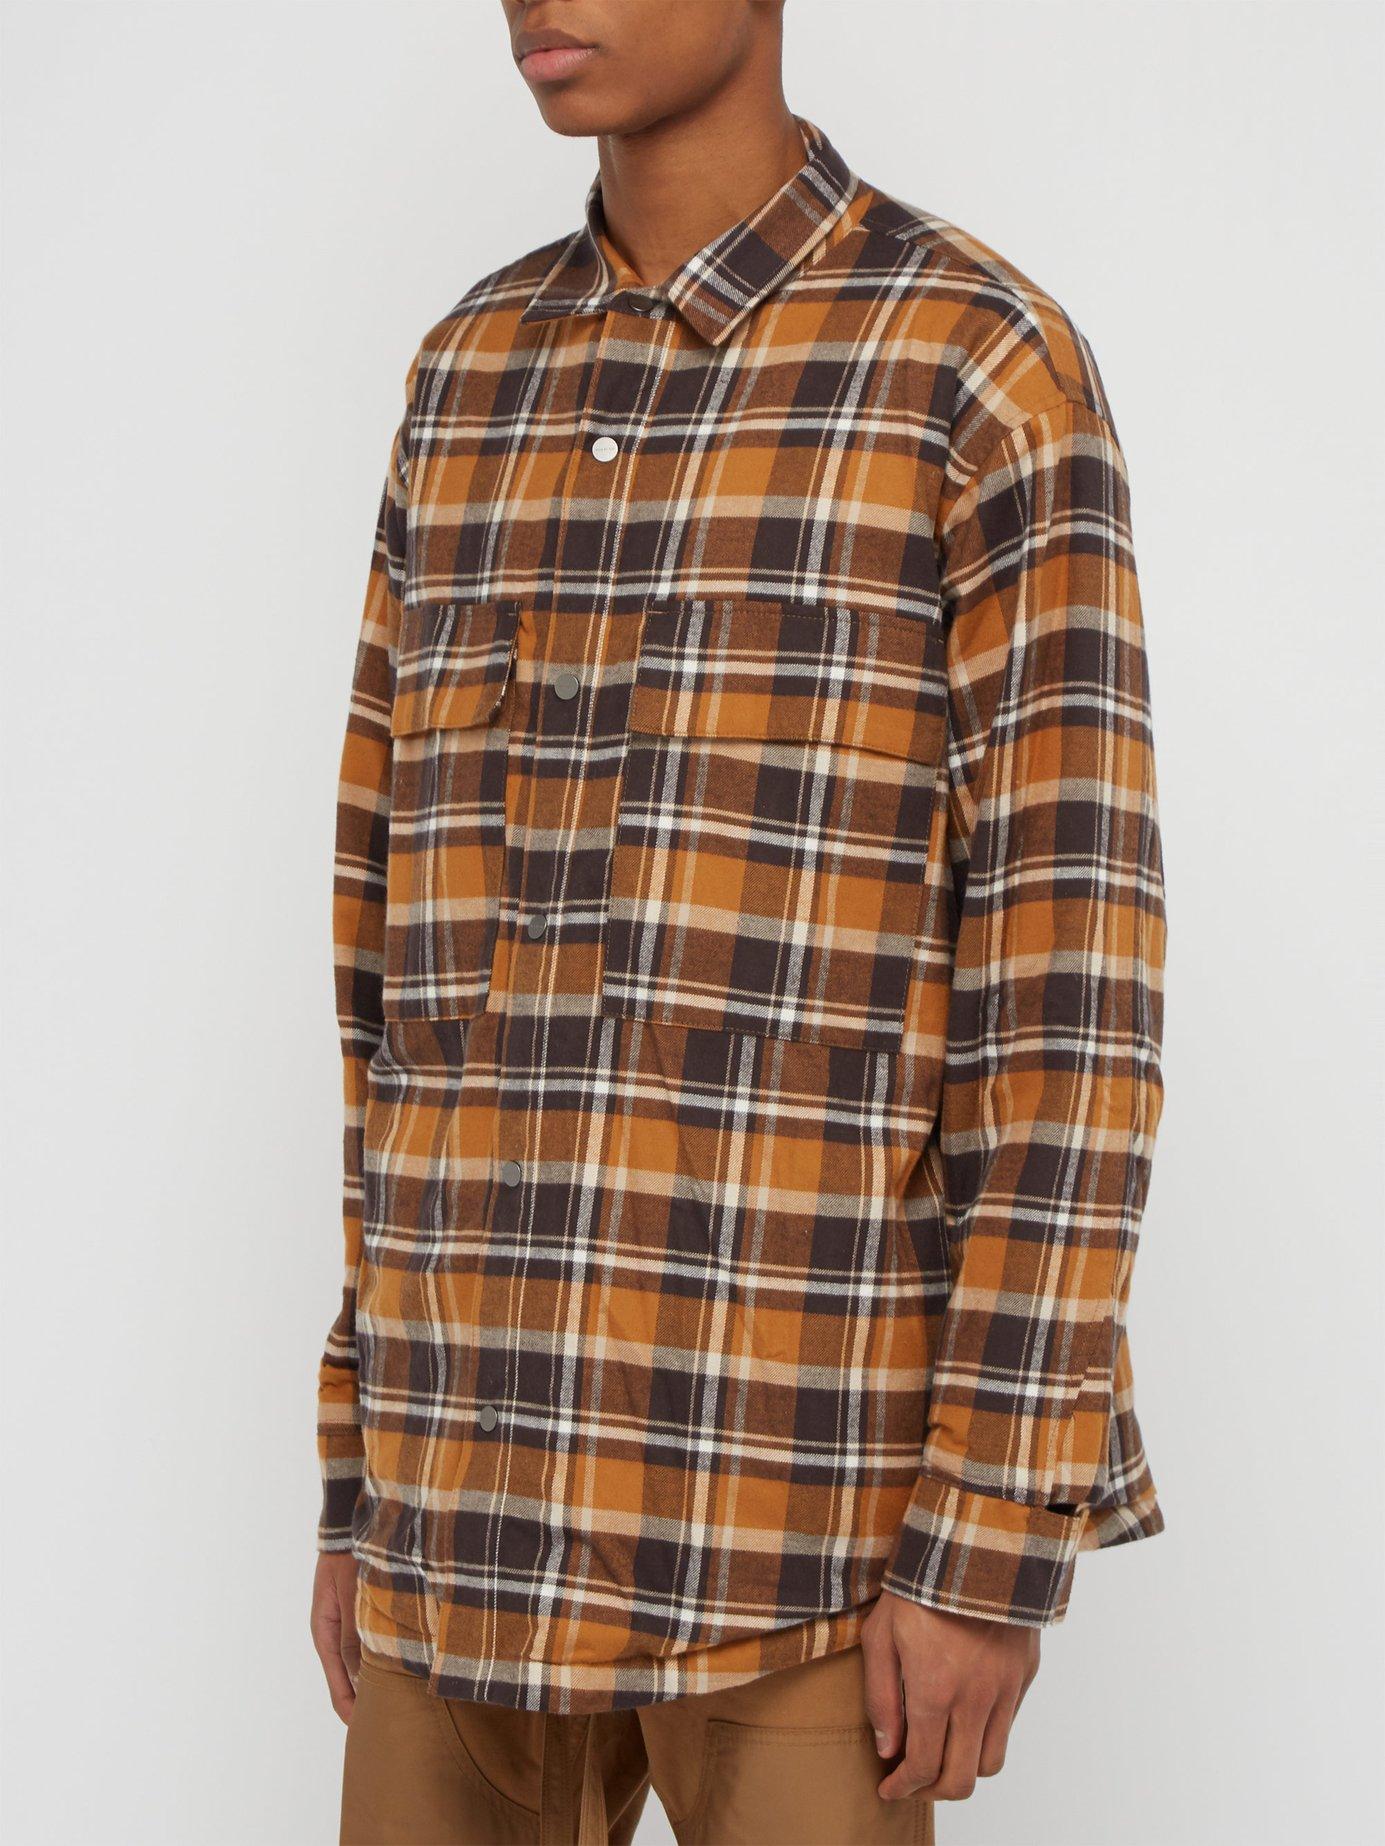 Fear Of God Checked Flannel Overshirt in Brown for Men - Lyst